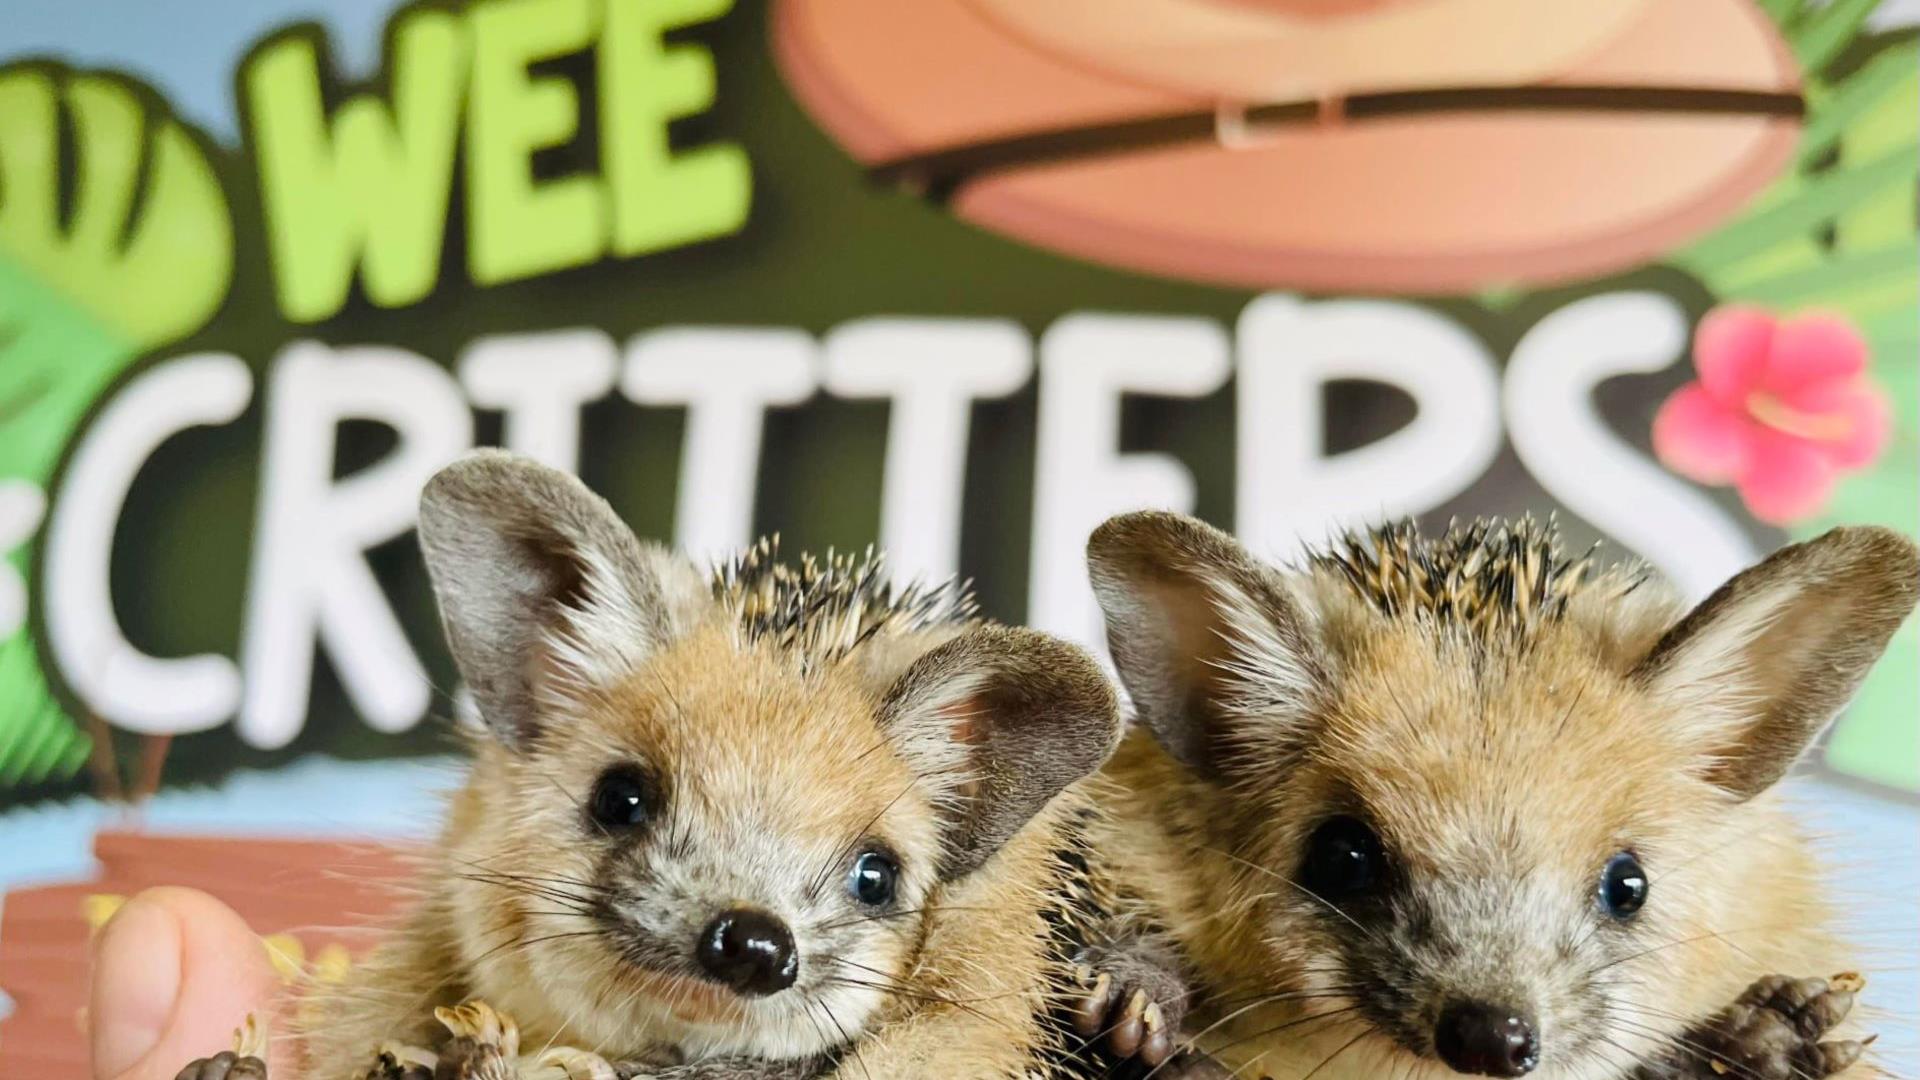 Two hedgehogs held in front of the Wee Critters logo.